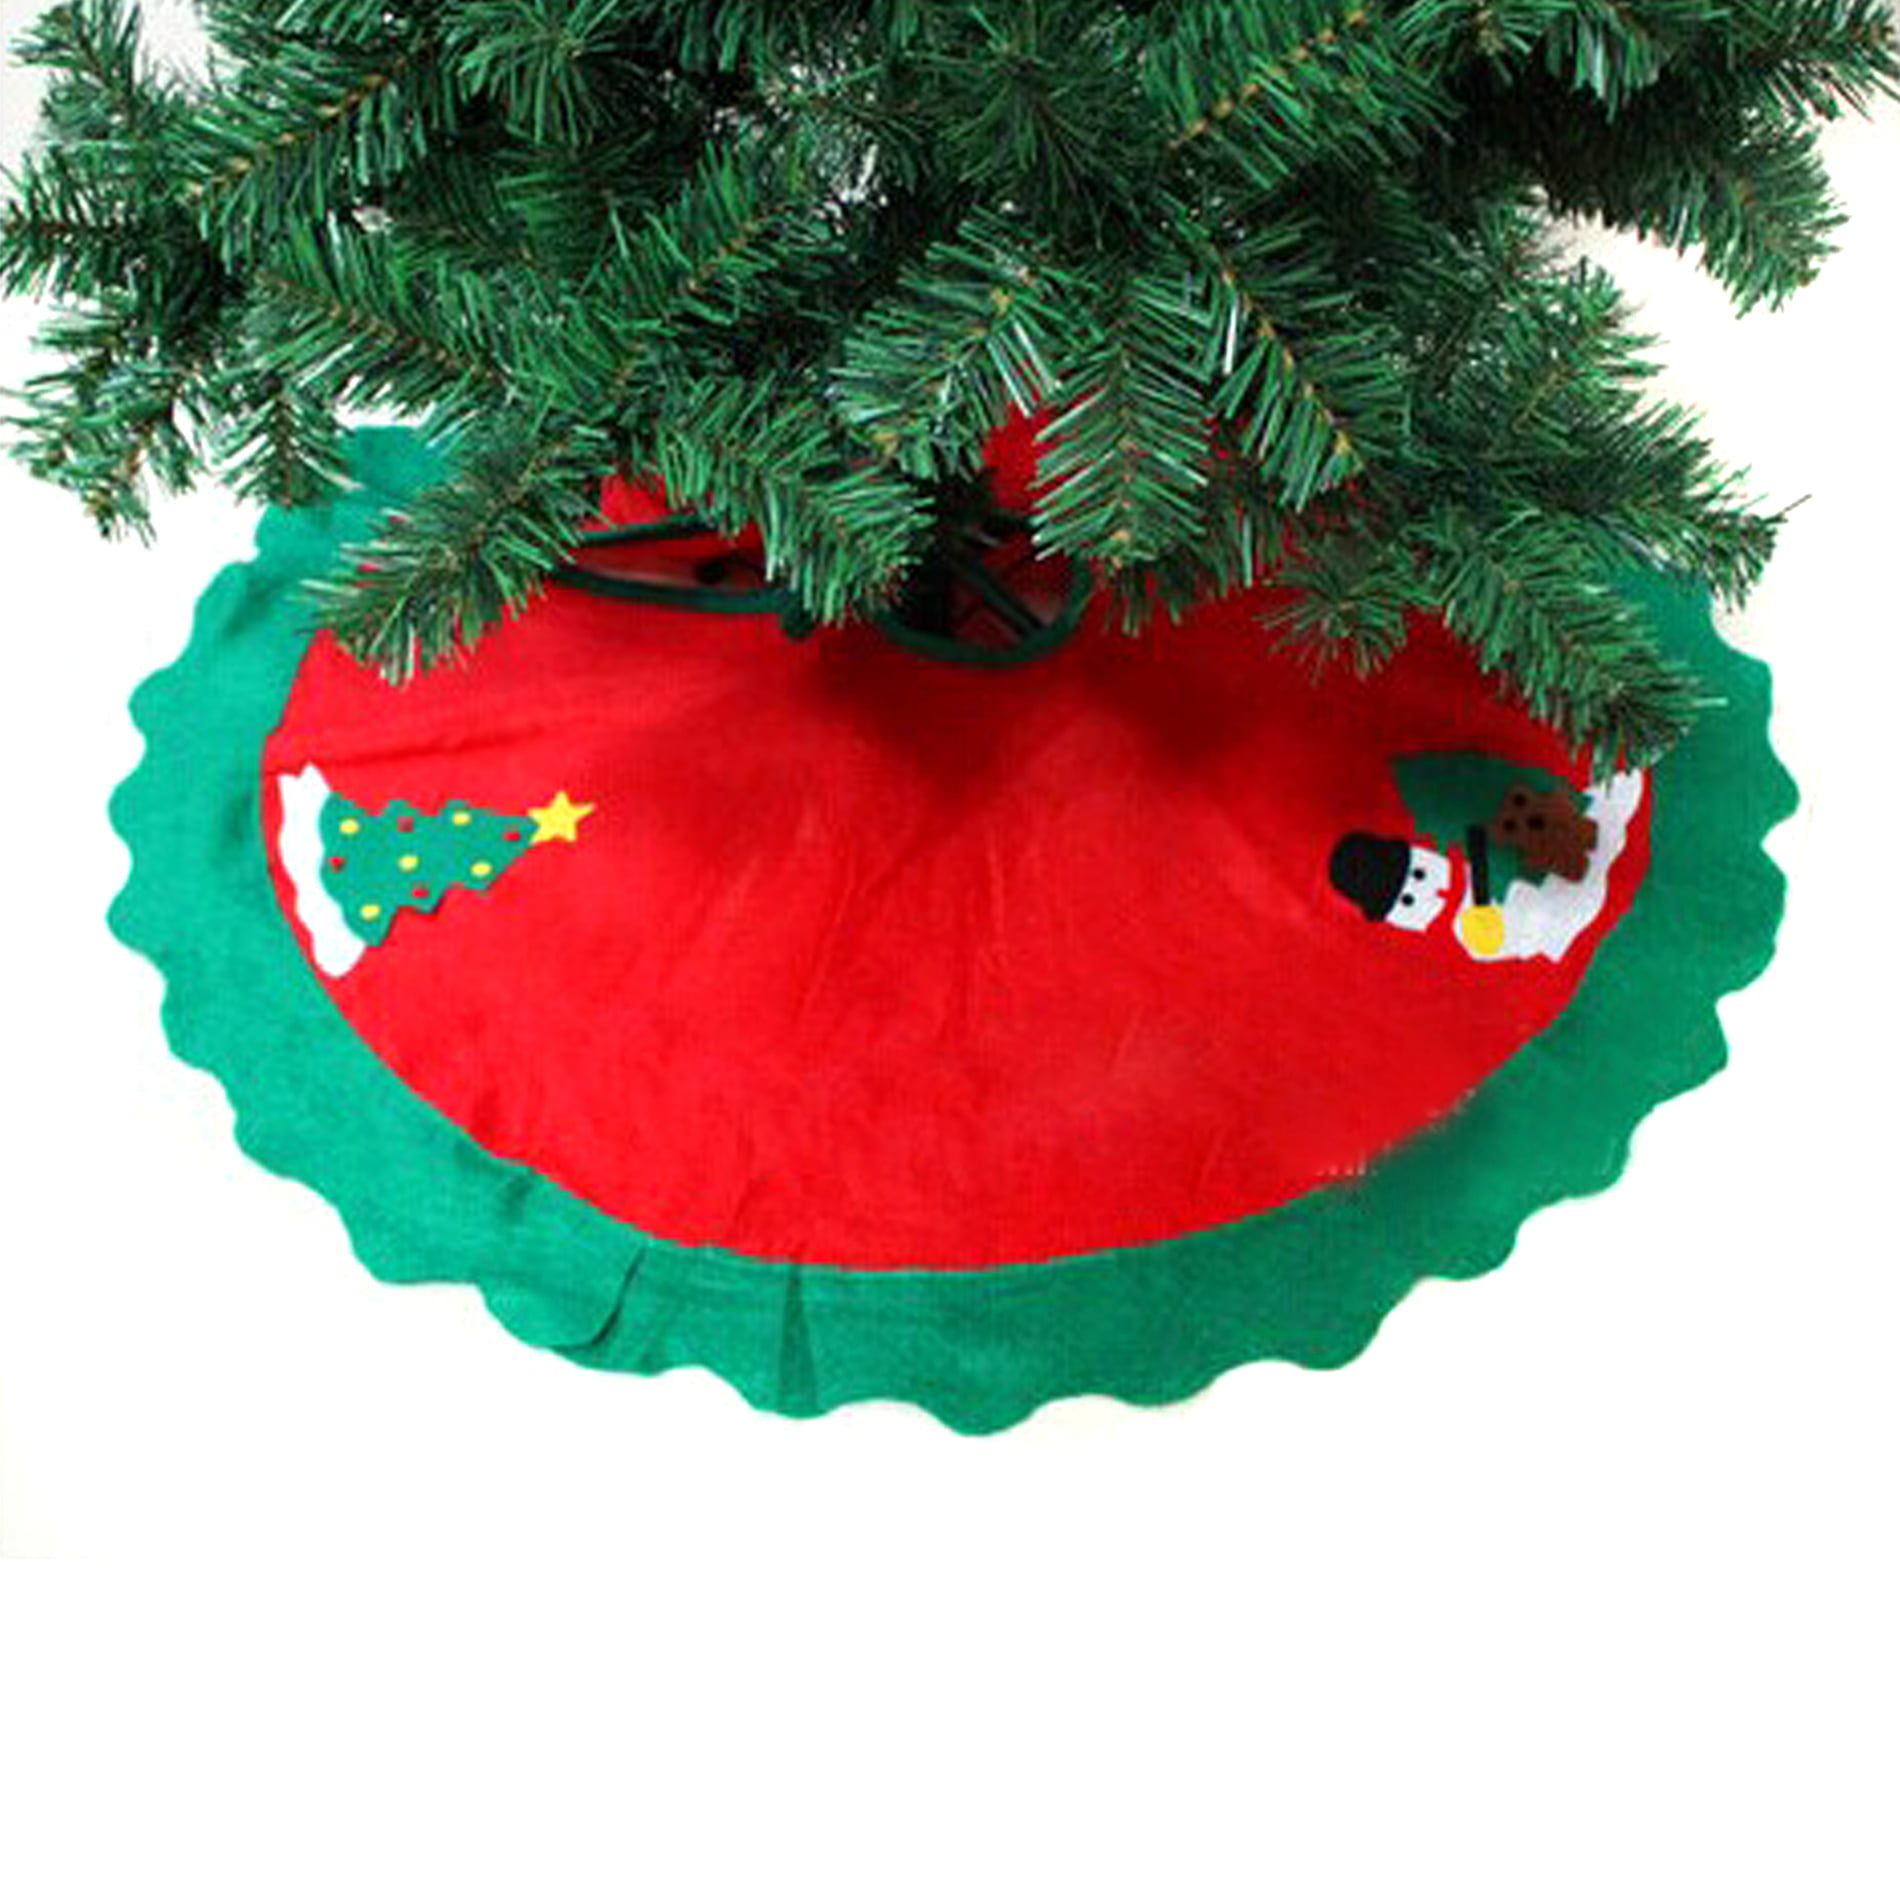 PICTURESQUE Red Christmas Tree Skirt 18 Inches Santa Claus and Snowman Pattern Xmas Tree Skirt for Holiday Decorations 